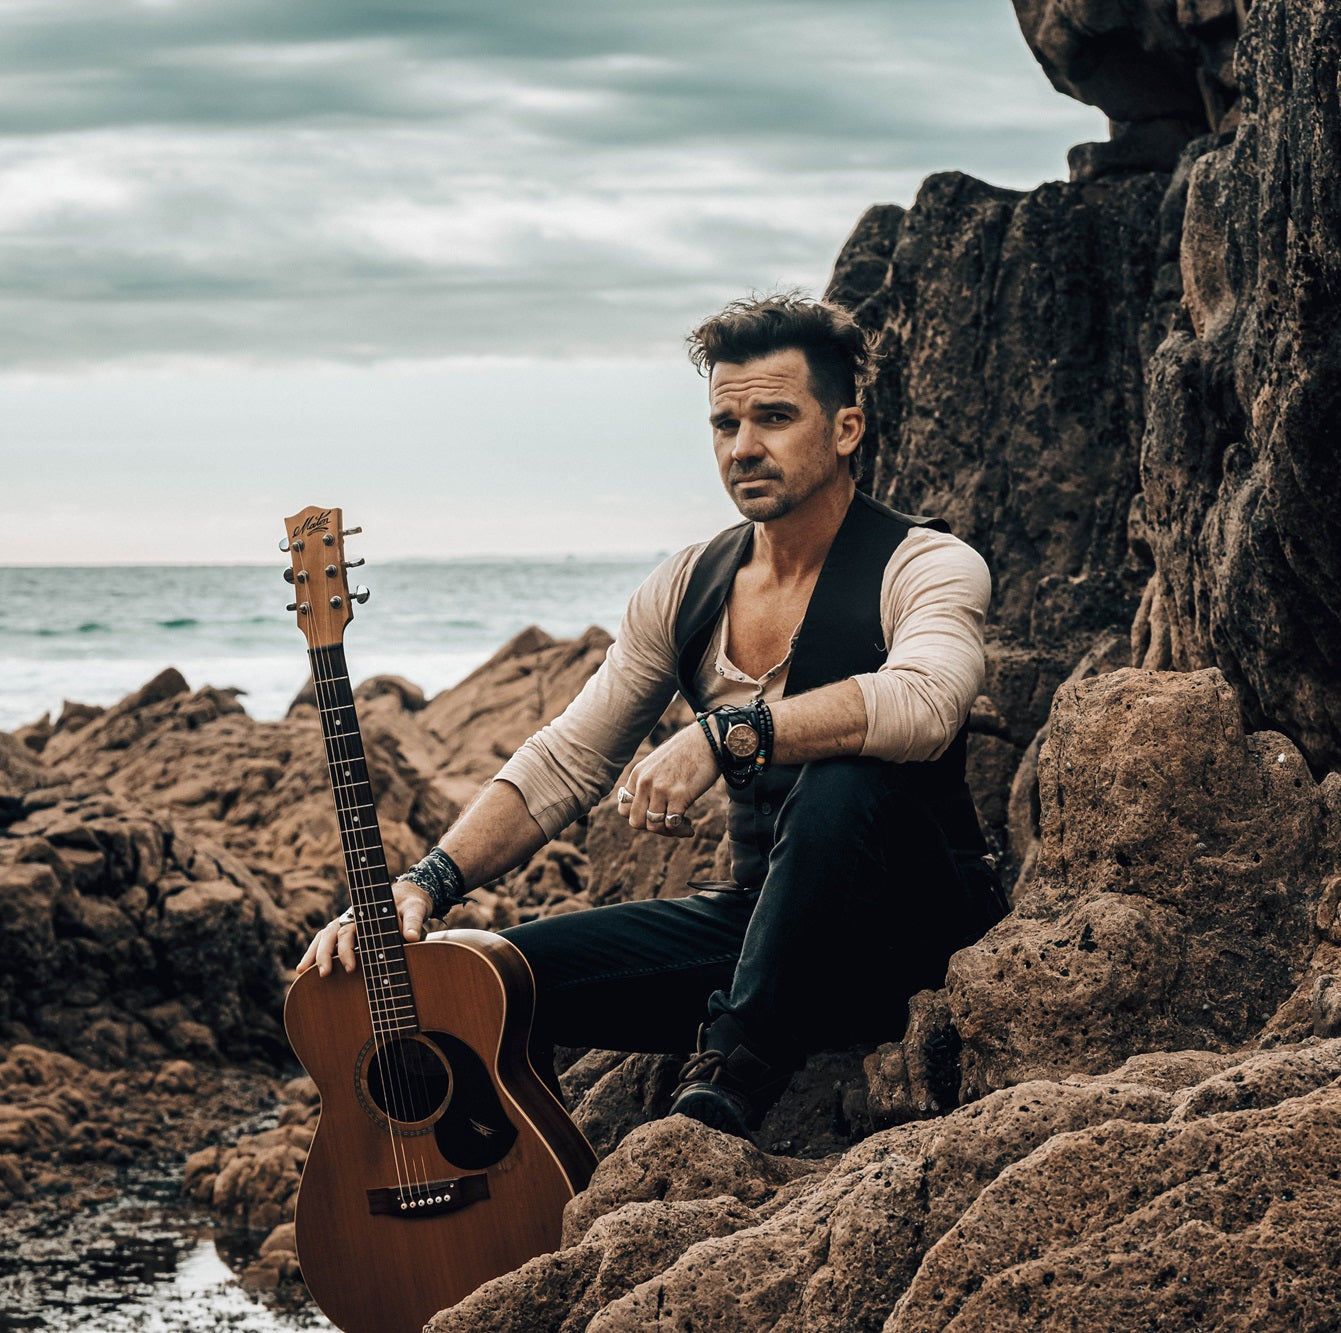 Australia’s Mark Howard shares a gorgeous ode to lost love in ‘Scarlette’